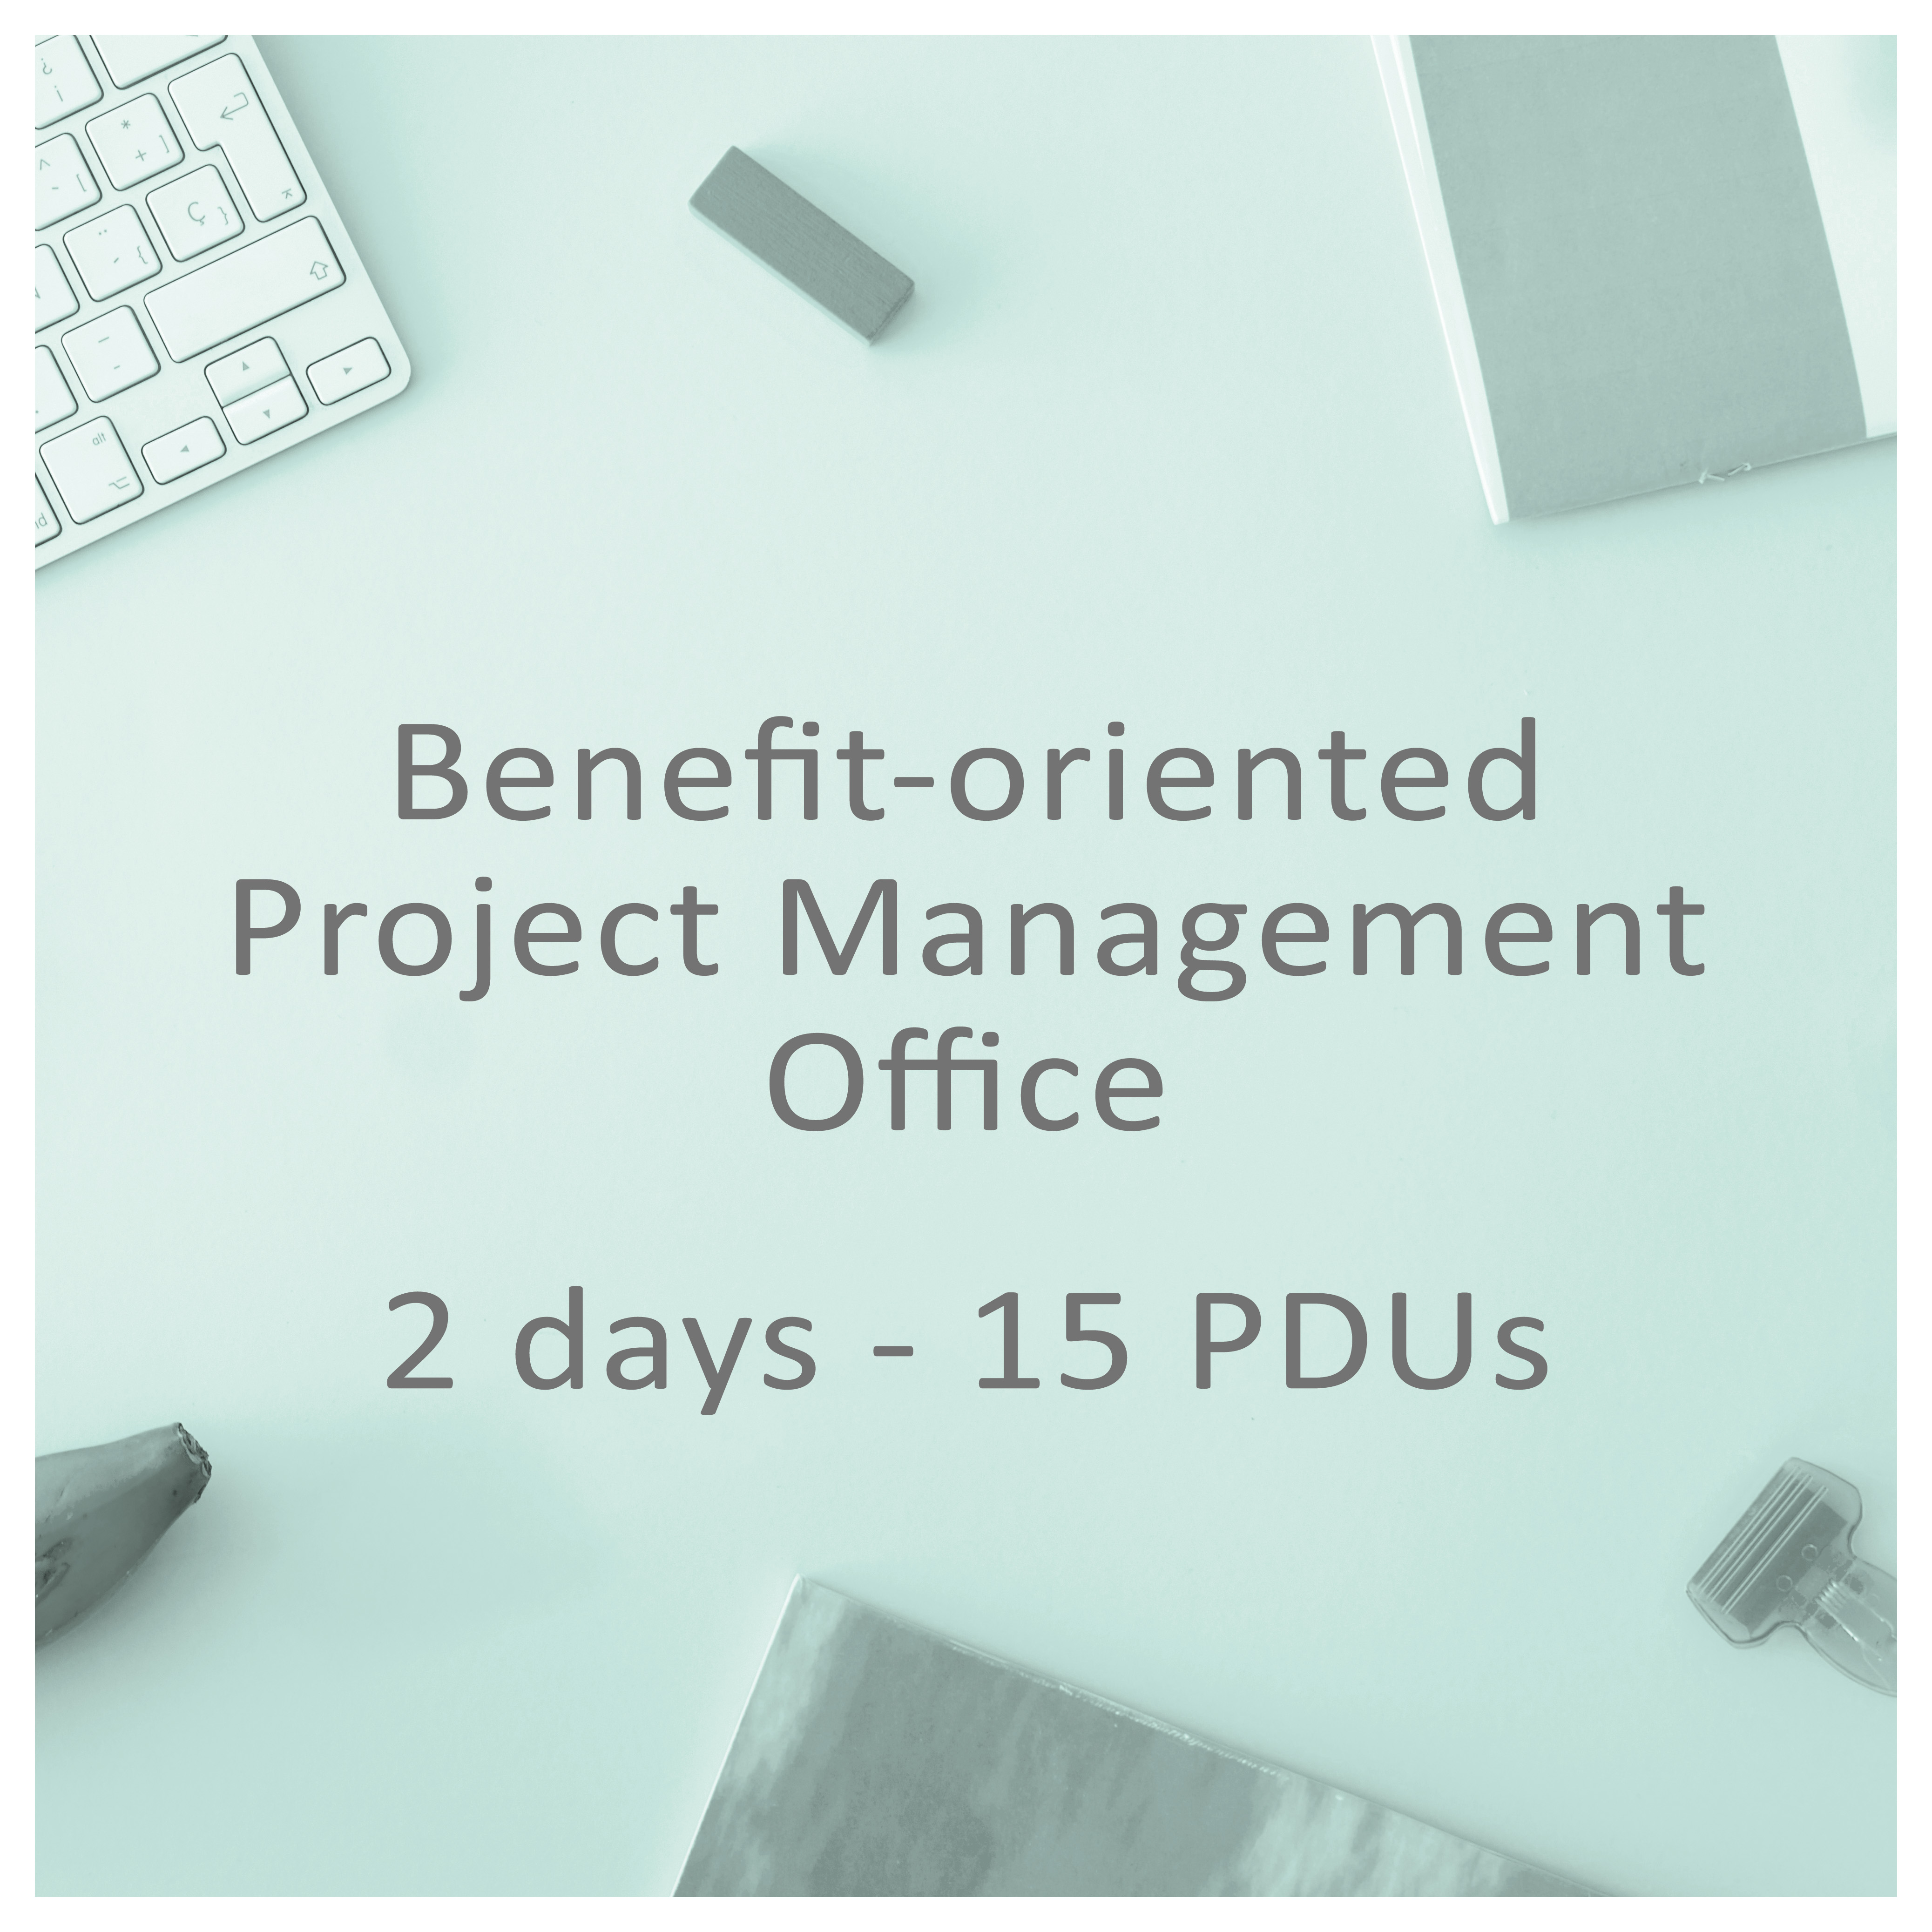 Benefit-oriented Project Management Office (PMO)